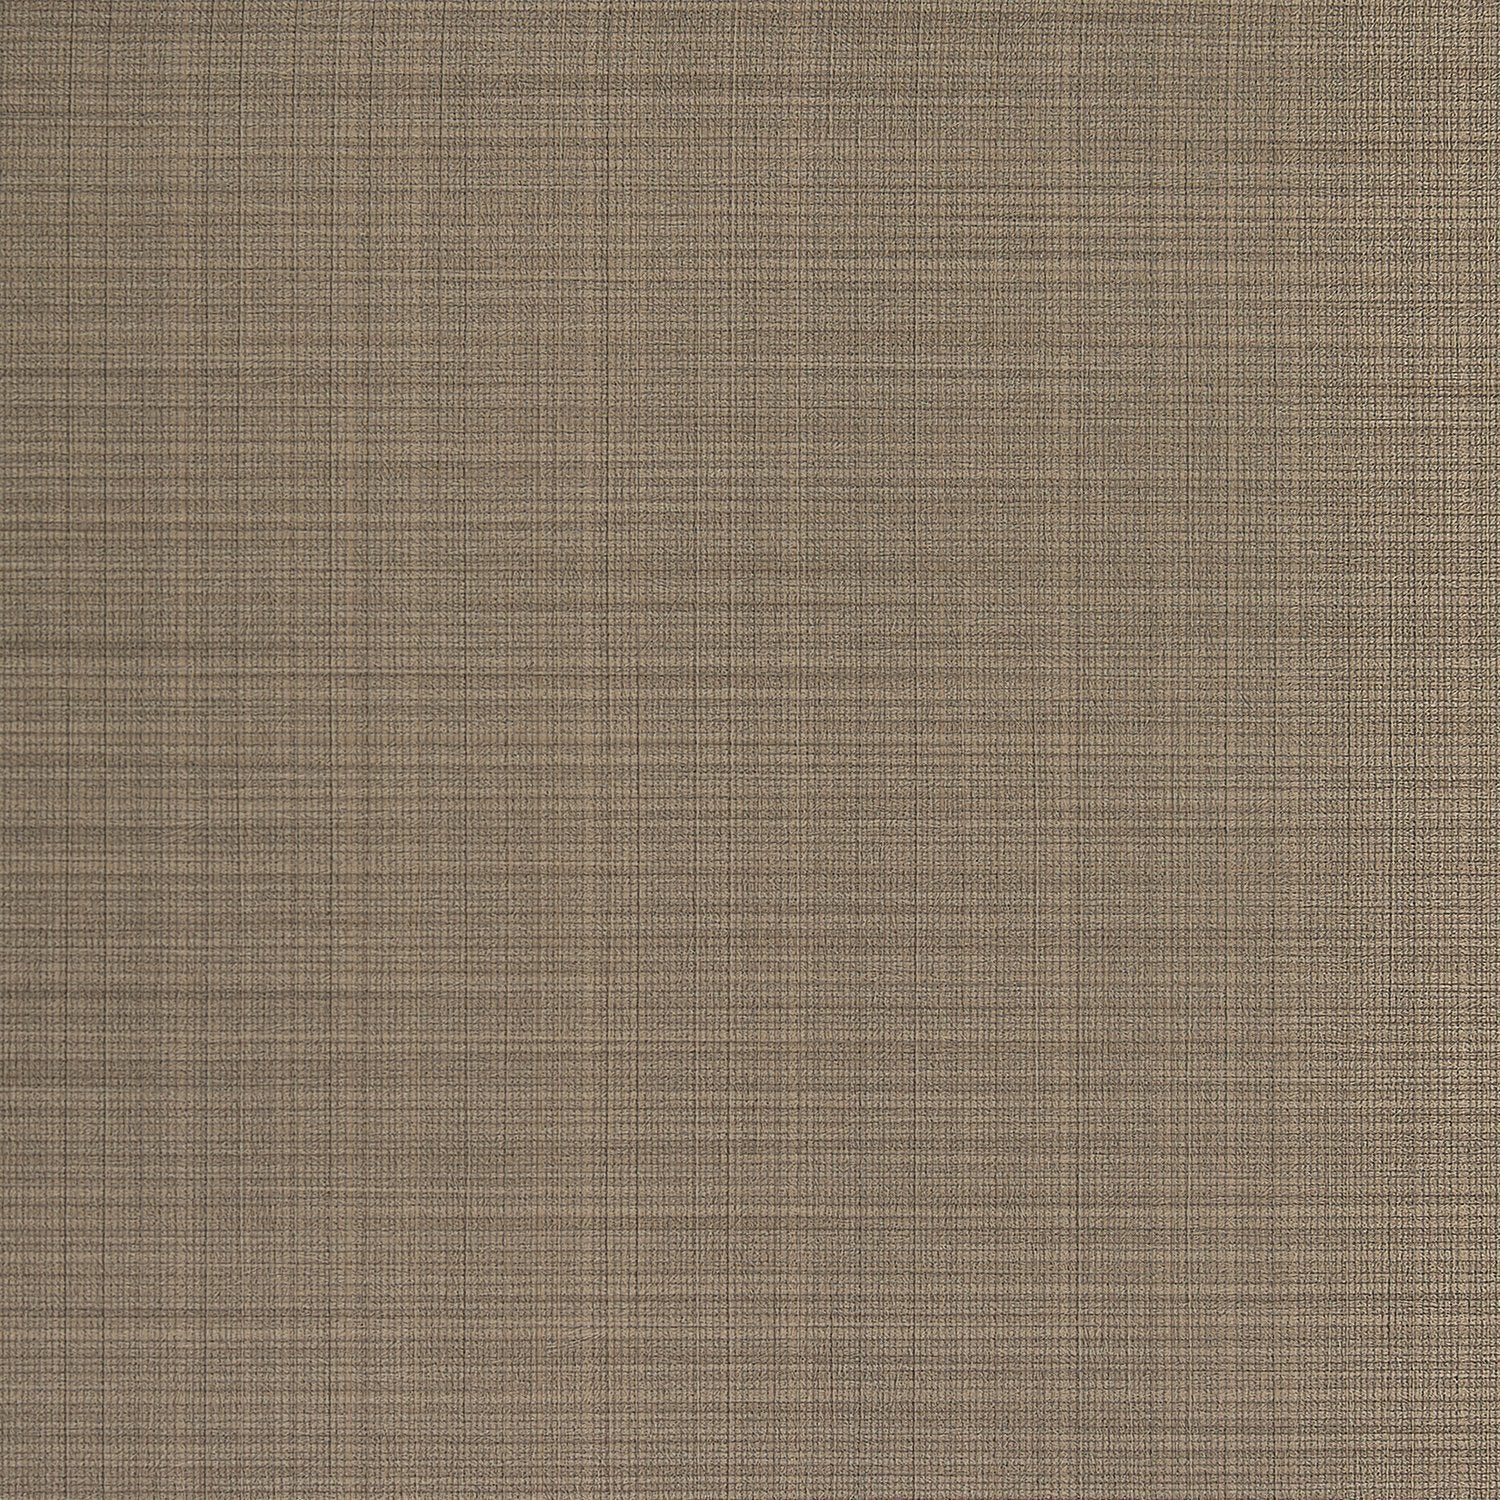 Angles Silk - Y47595 - Wallcovering - Vycon - Kube Contract